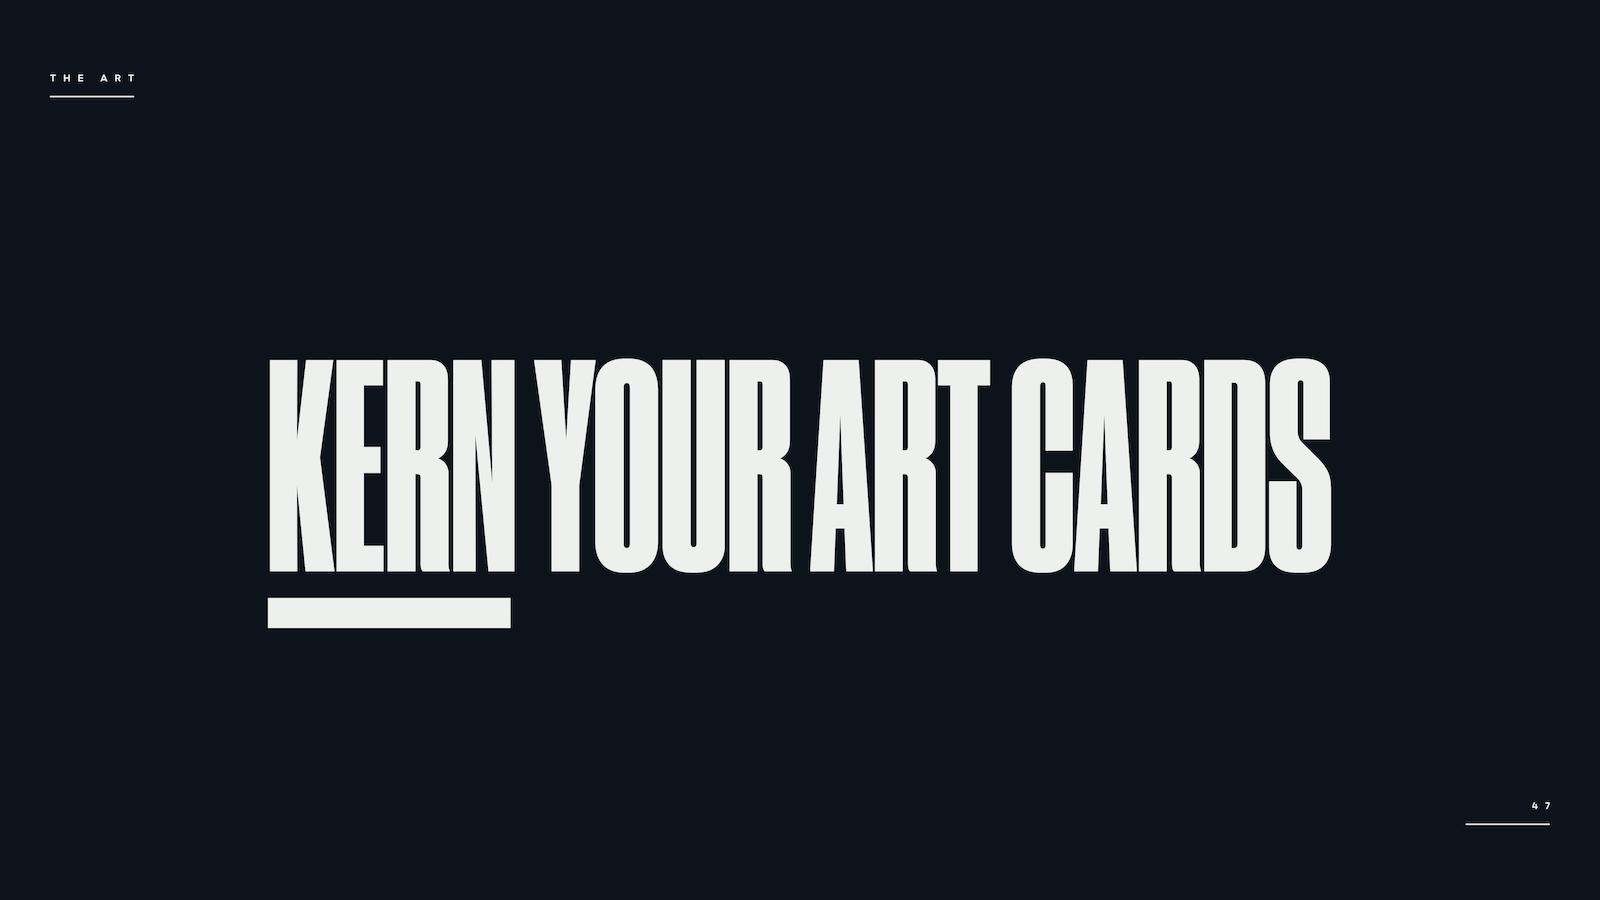 KERN YOUR ART CARDS